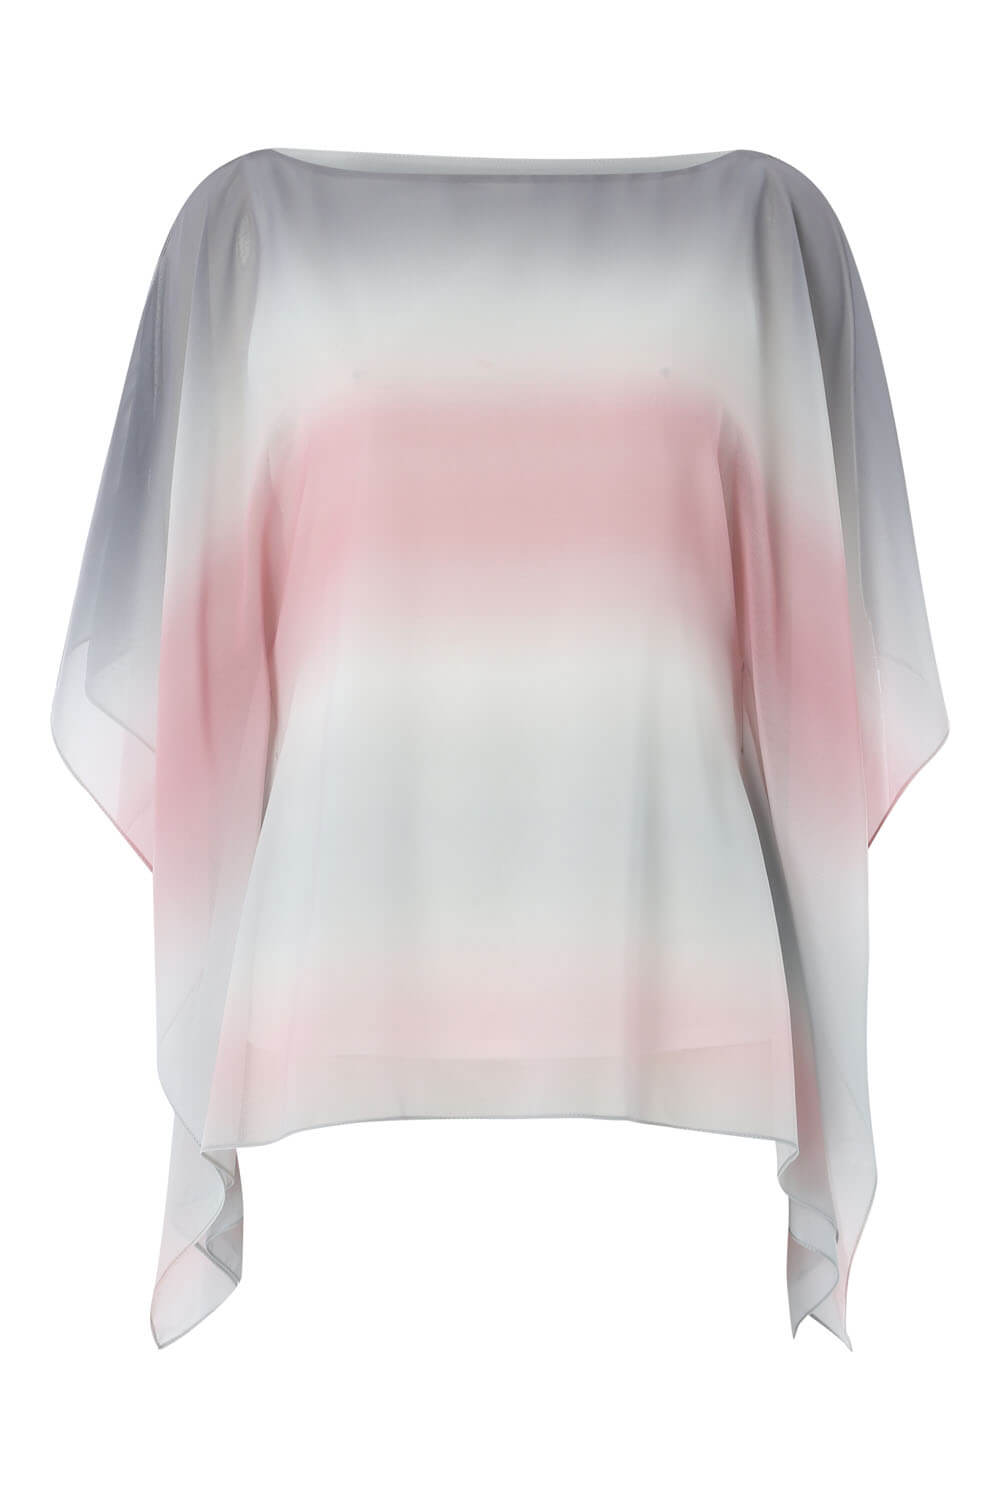 PINK Ombre Split Sleeve Overlay Top, Image 4 of 8